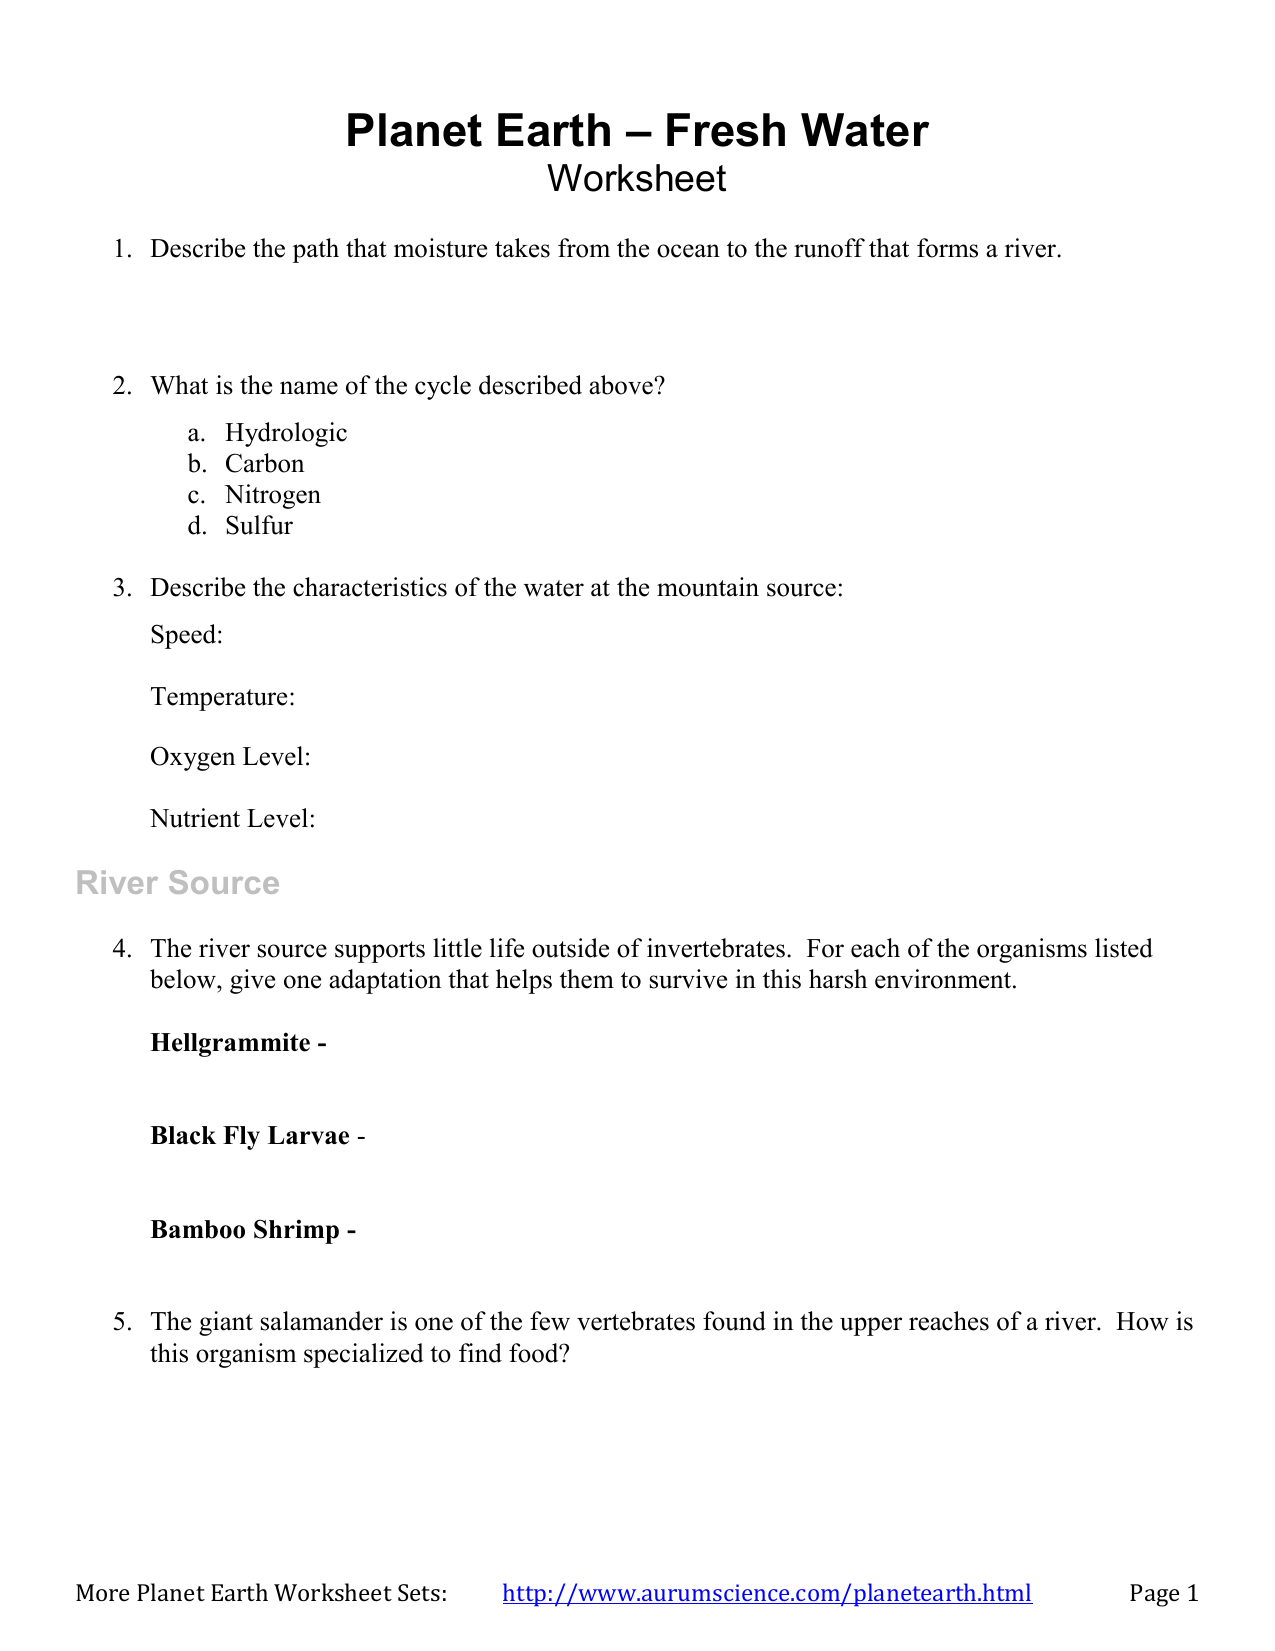 Planet Earth - Freshwater worksheet With Planet Earth Freshwater Worksheet